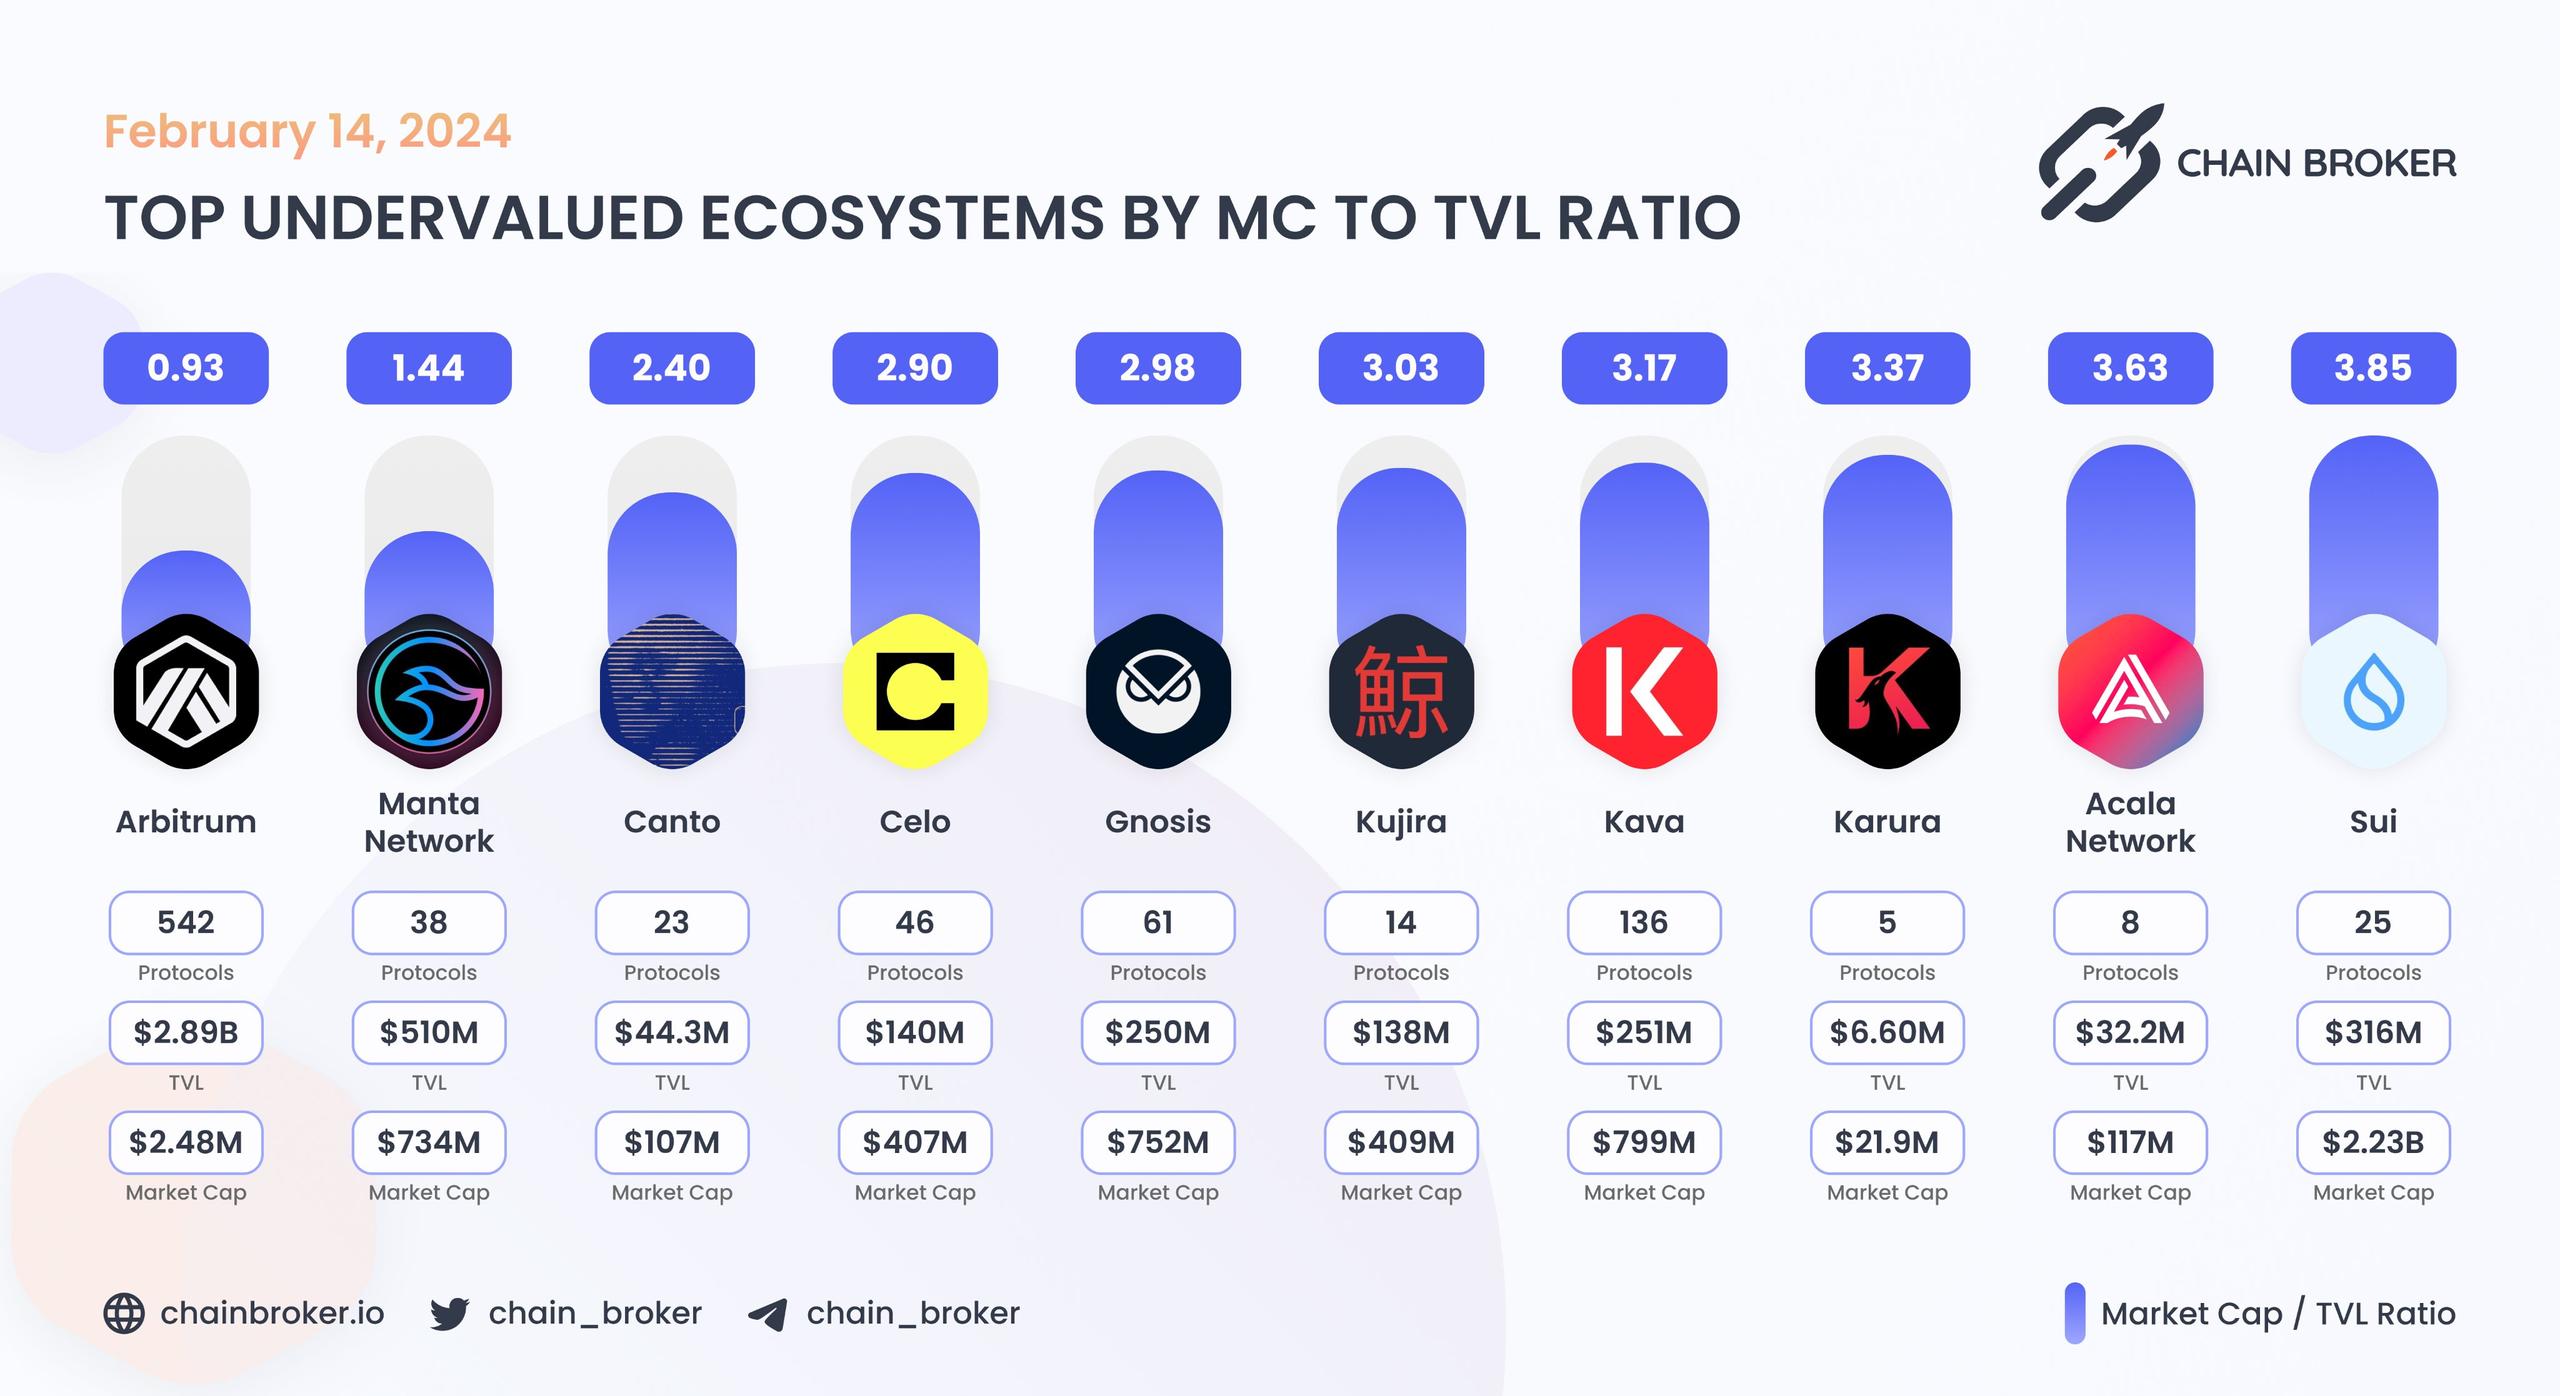 Top undervalued ecosystems by MC/TVL Ratio